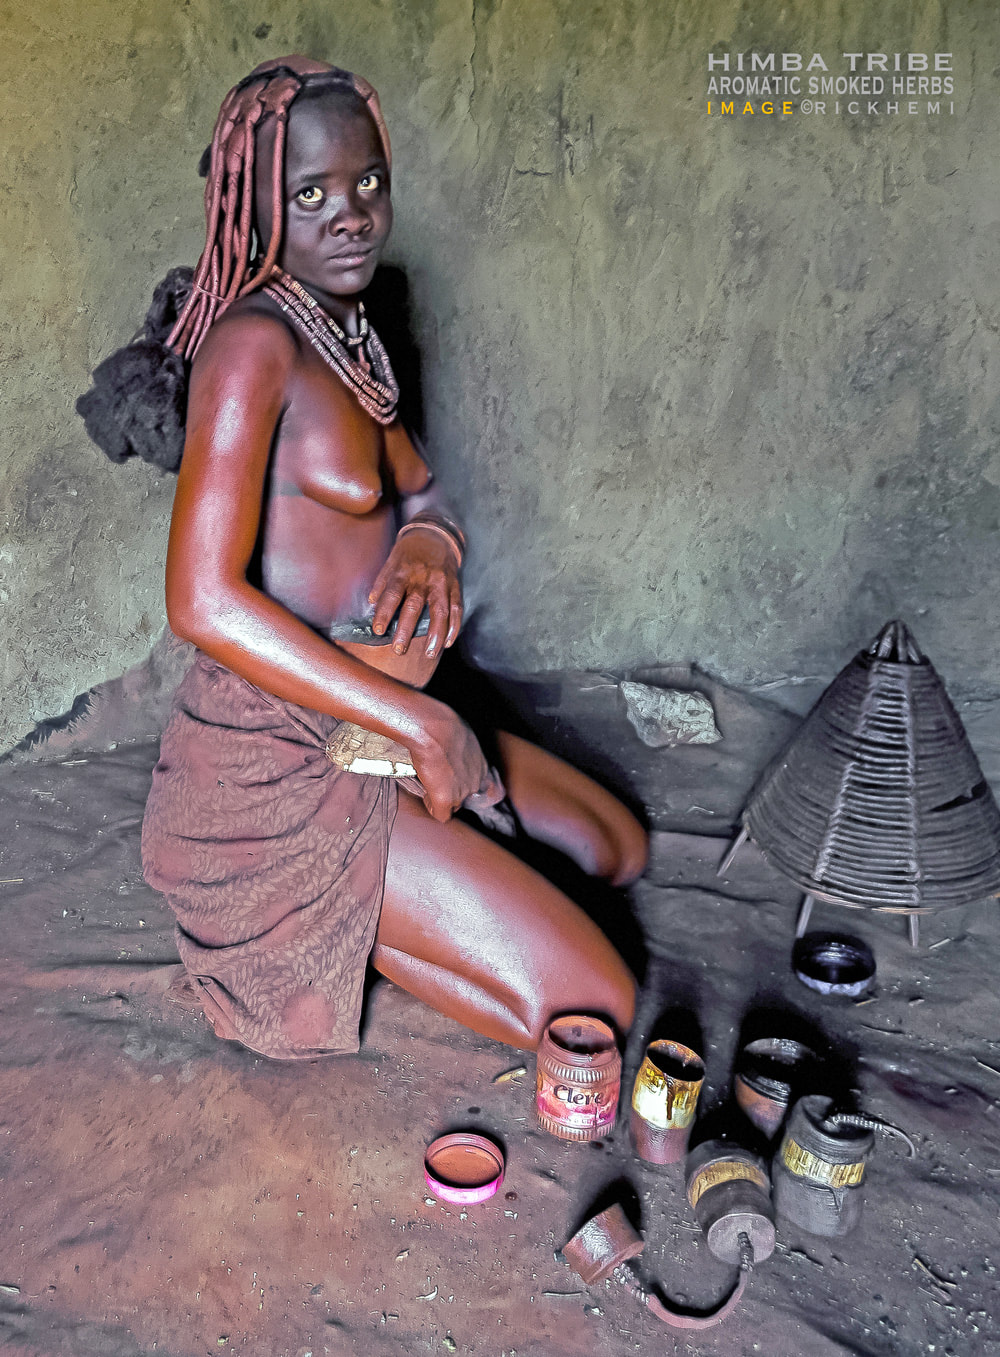 solo overland travel Africa, tribal Himba, aromatic smoked herb body cleansing agent, image by Rick Hemi